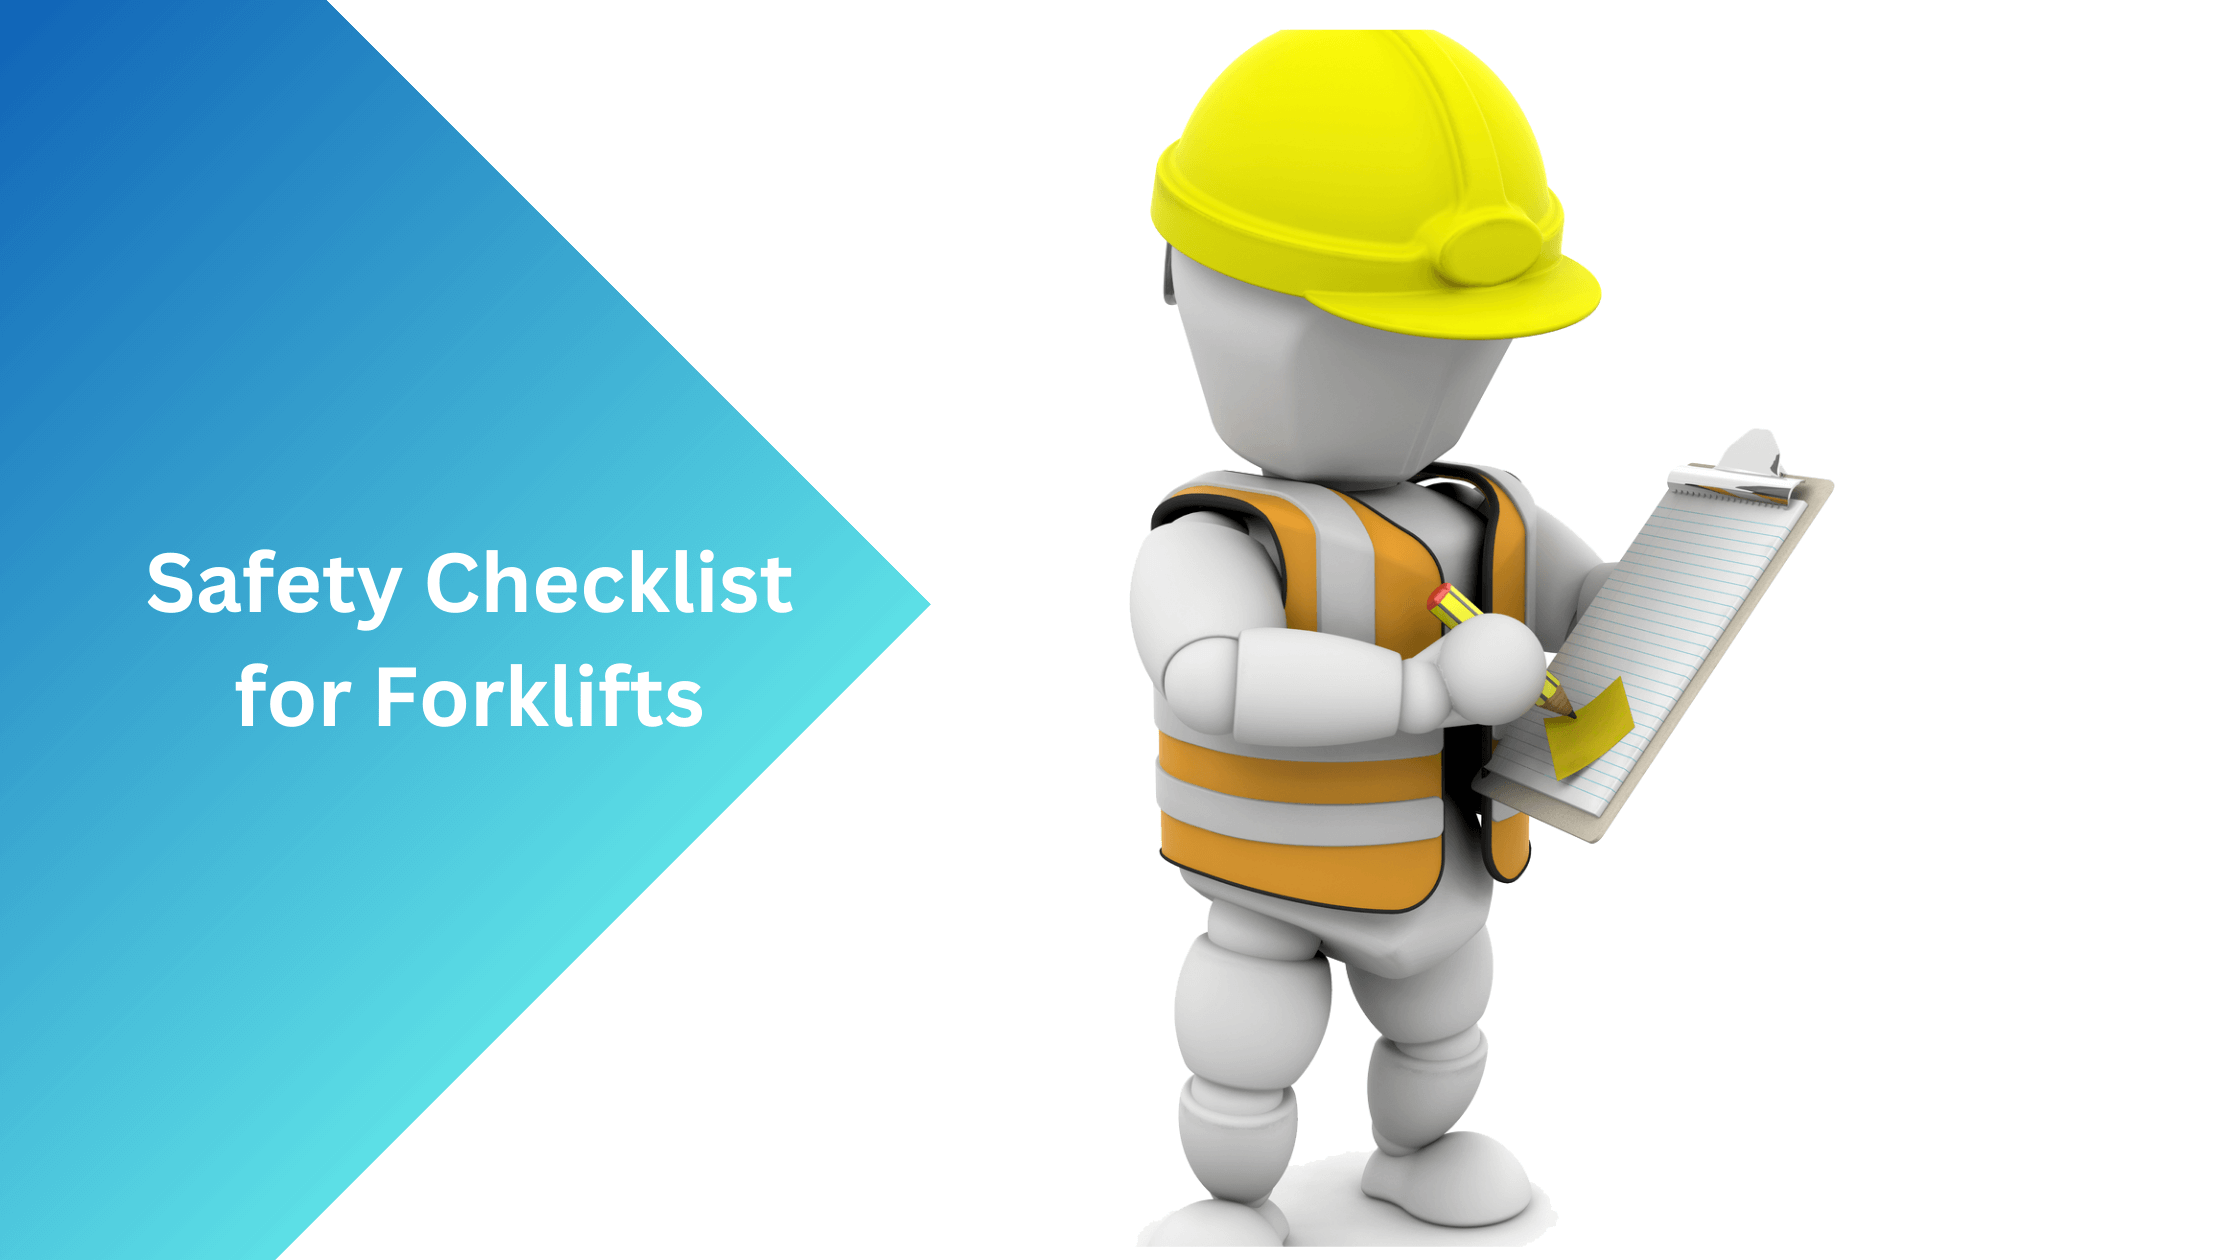 Safety Checklist for Forklifts - SIERA.AI